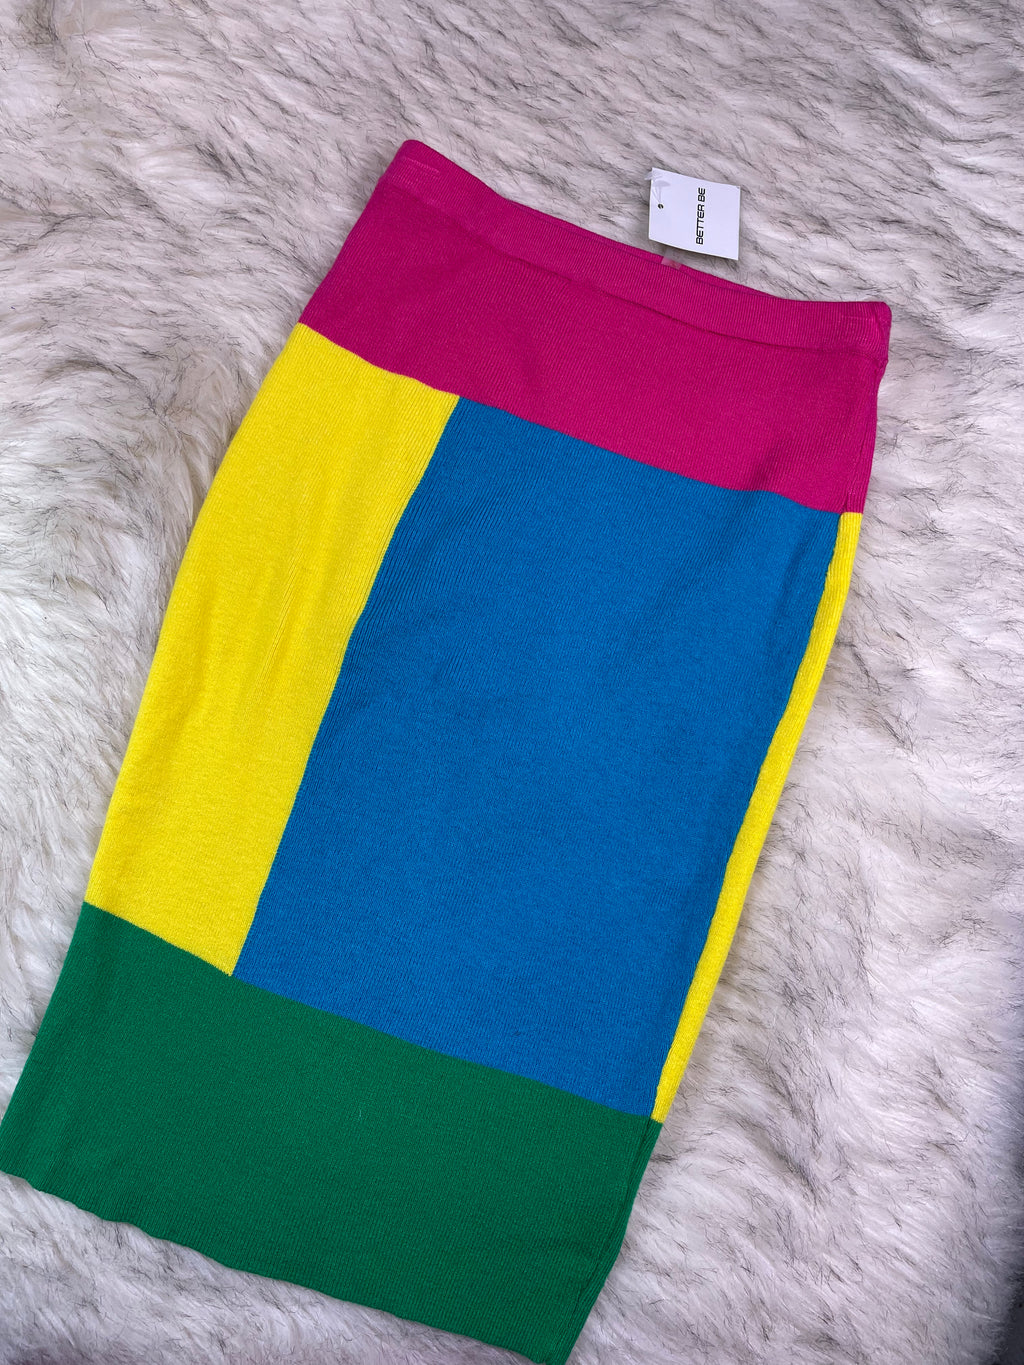 NEW color block skirt, Size XS